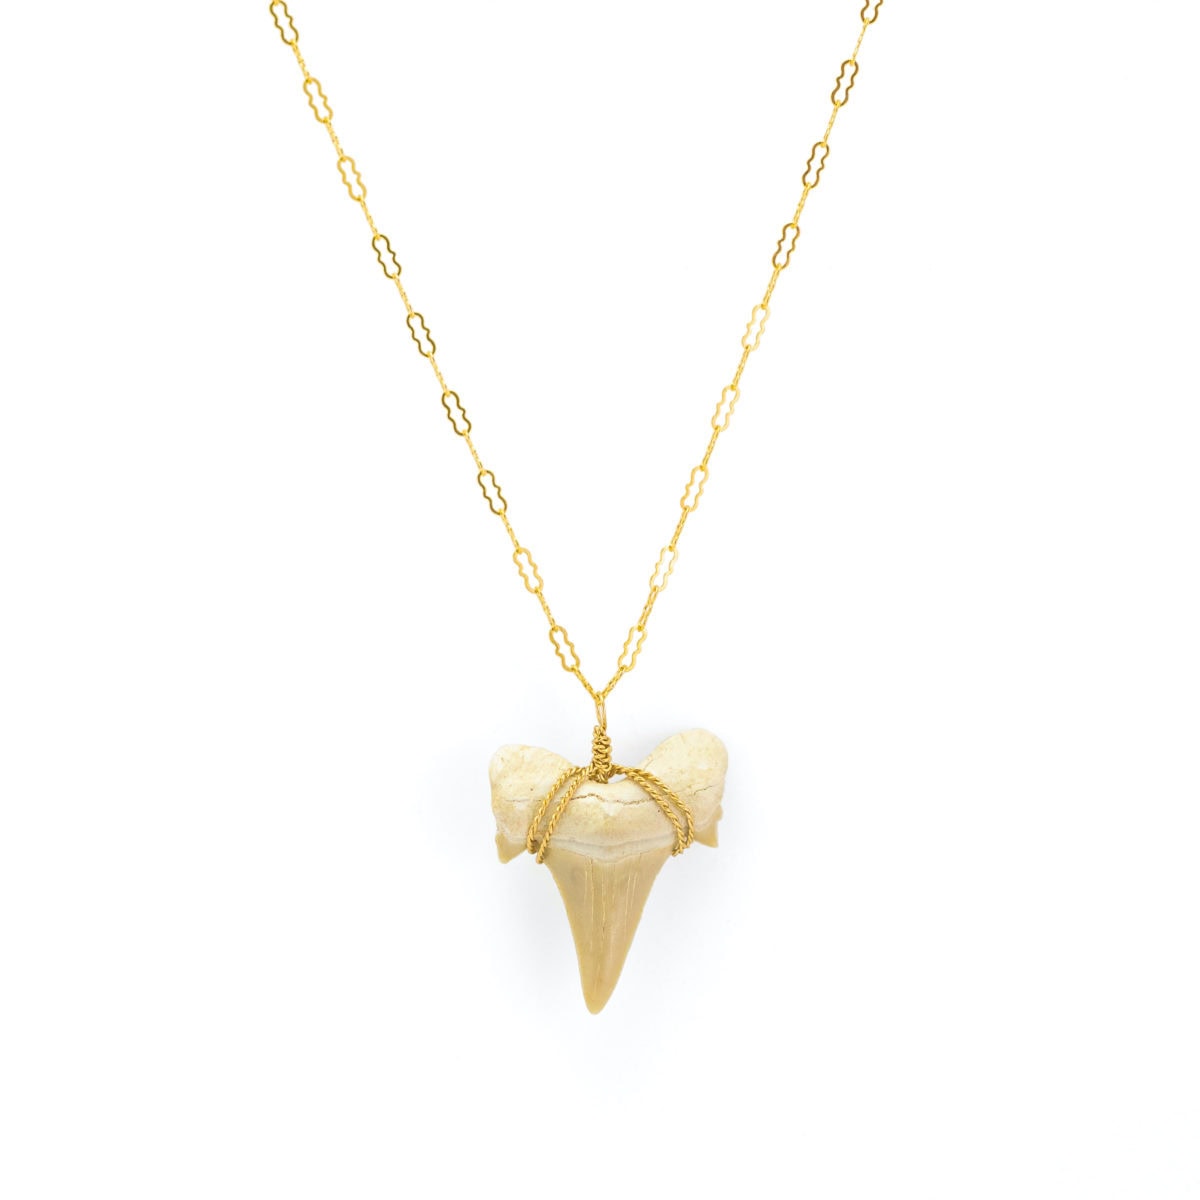 Forgetting Sarah Marshall Shark Tooth Necklace